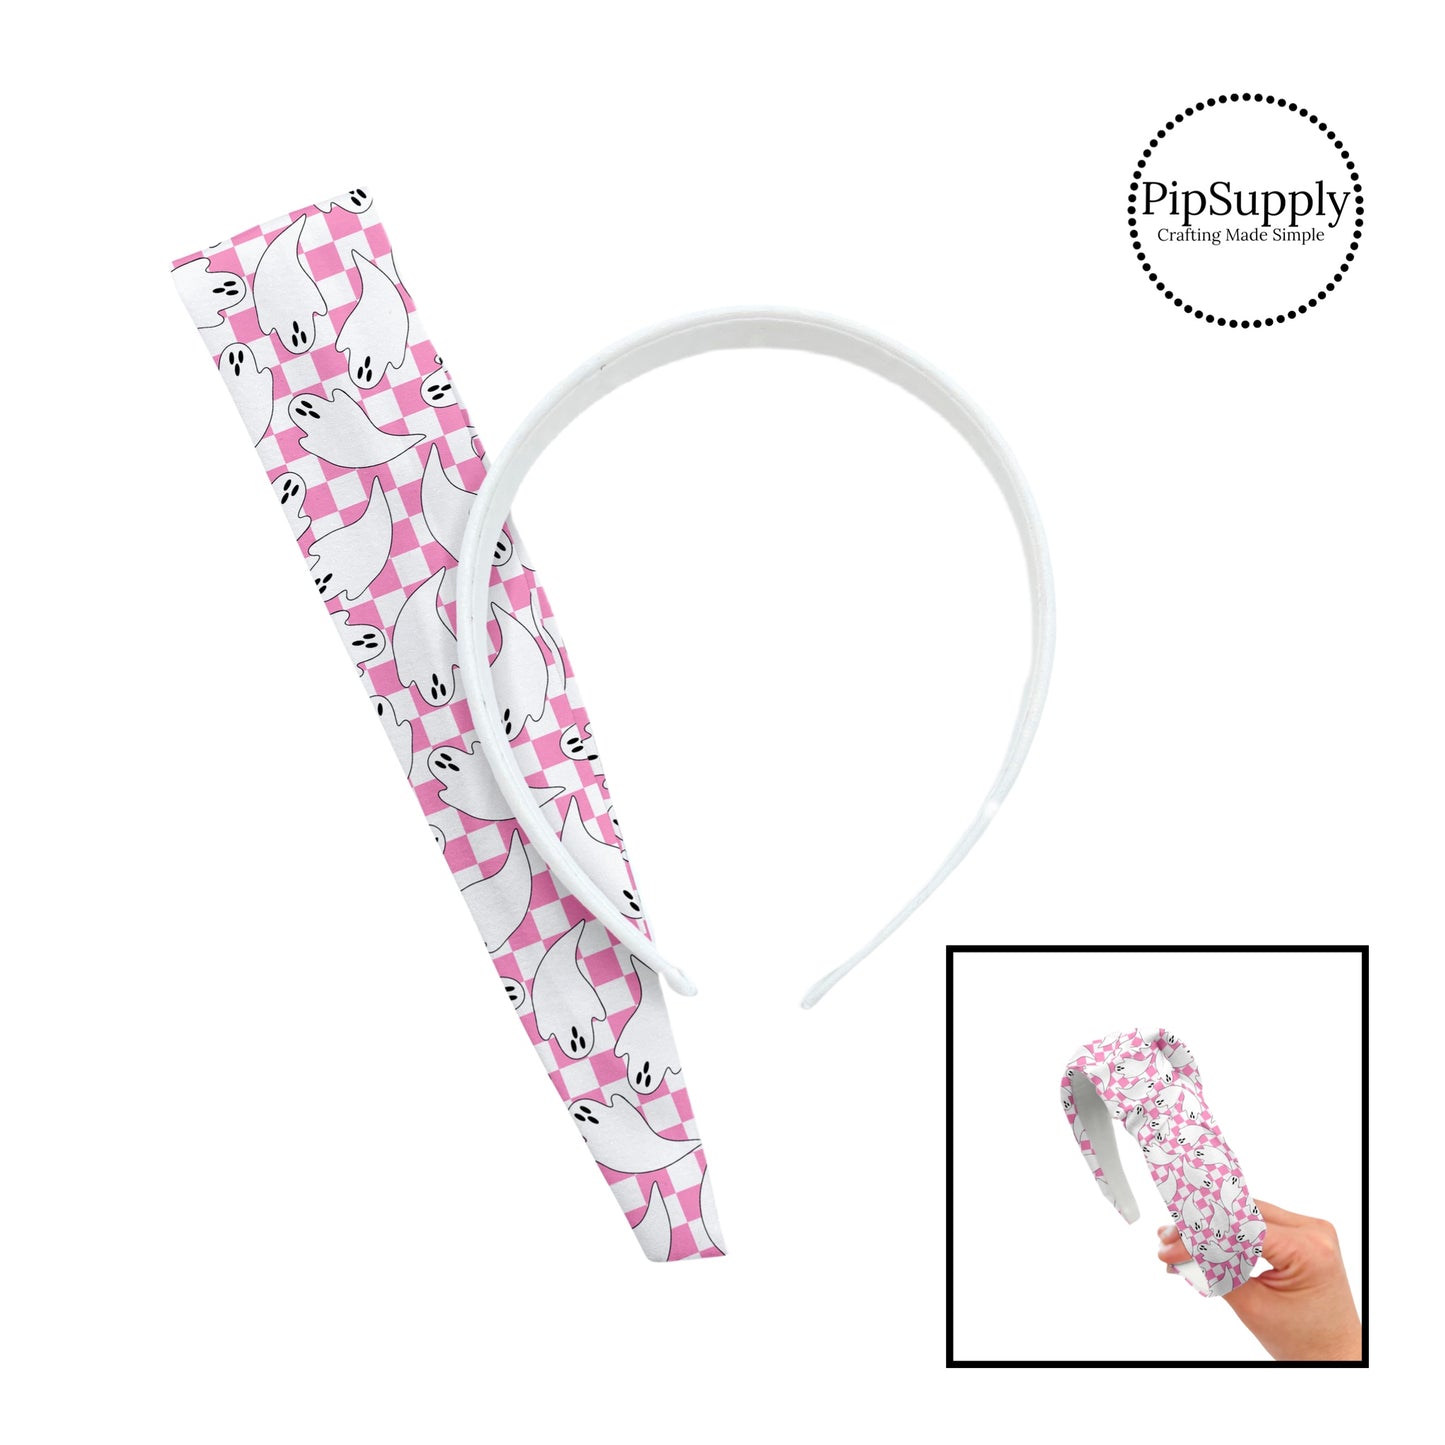 White floating ghost on pink and white checker knotted headband kit